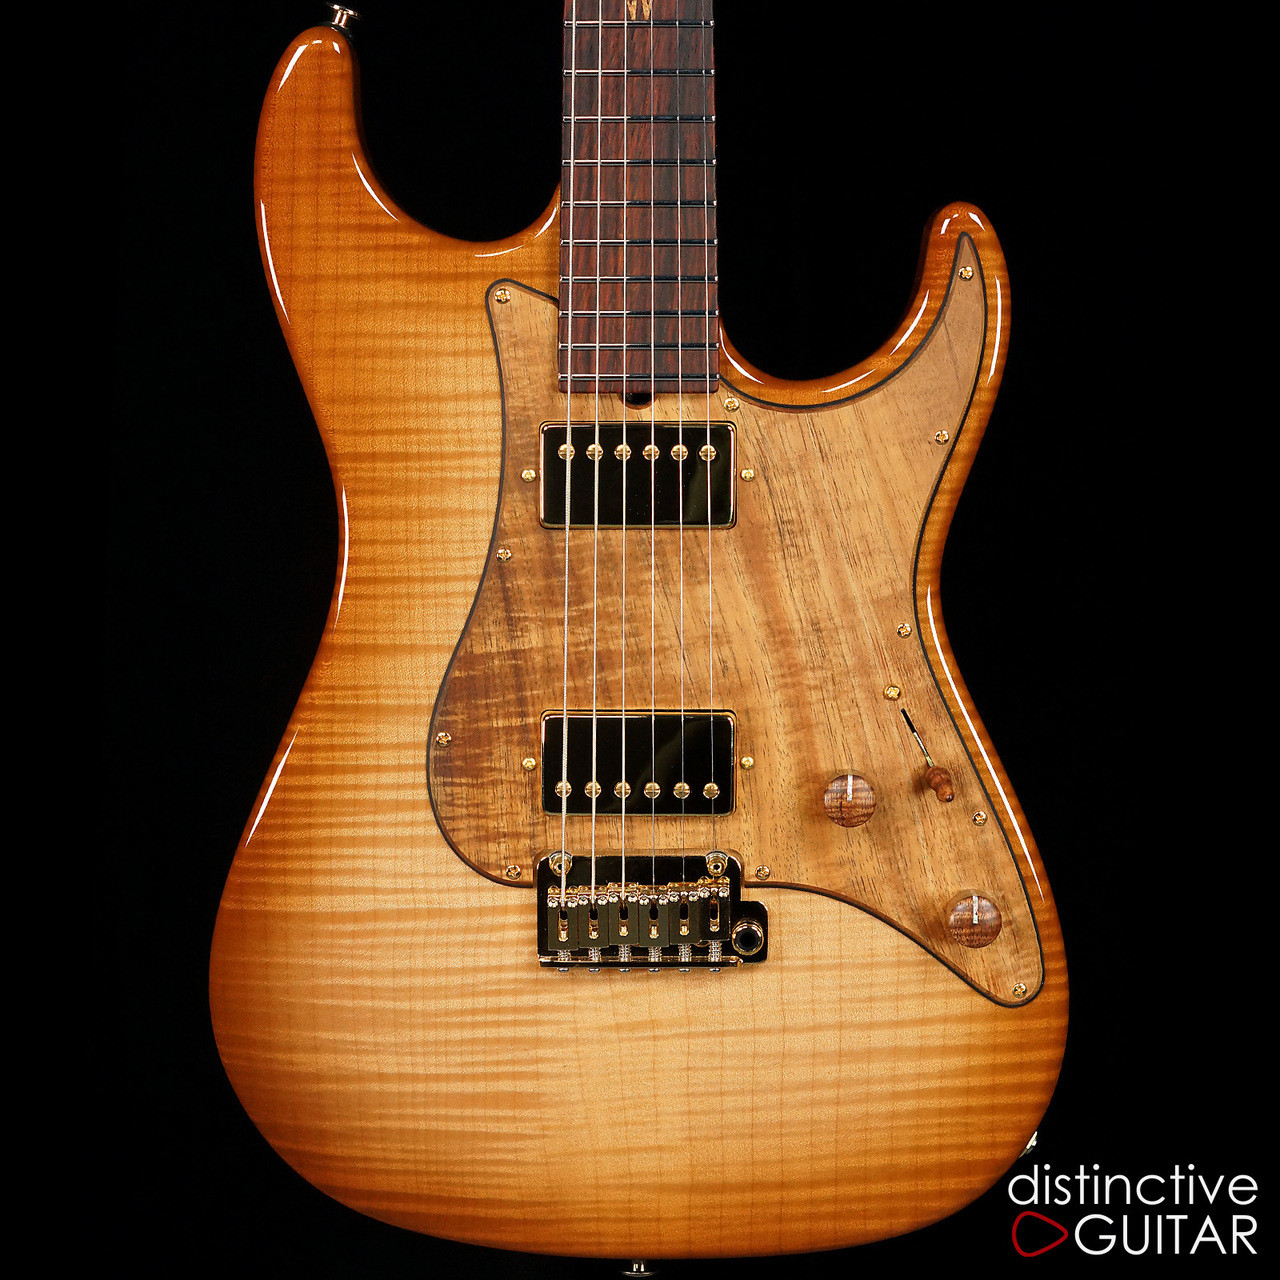 Distinctive Guitar - What's New At The Shop!! | Page 3 | The Gear Page